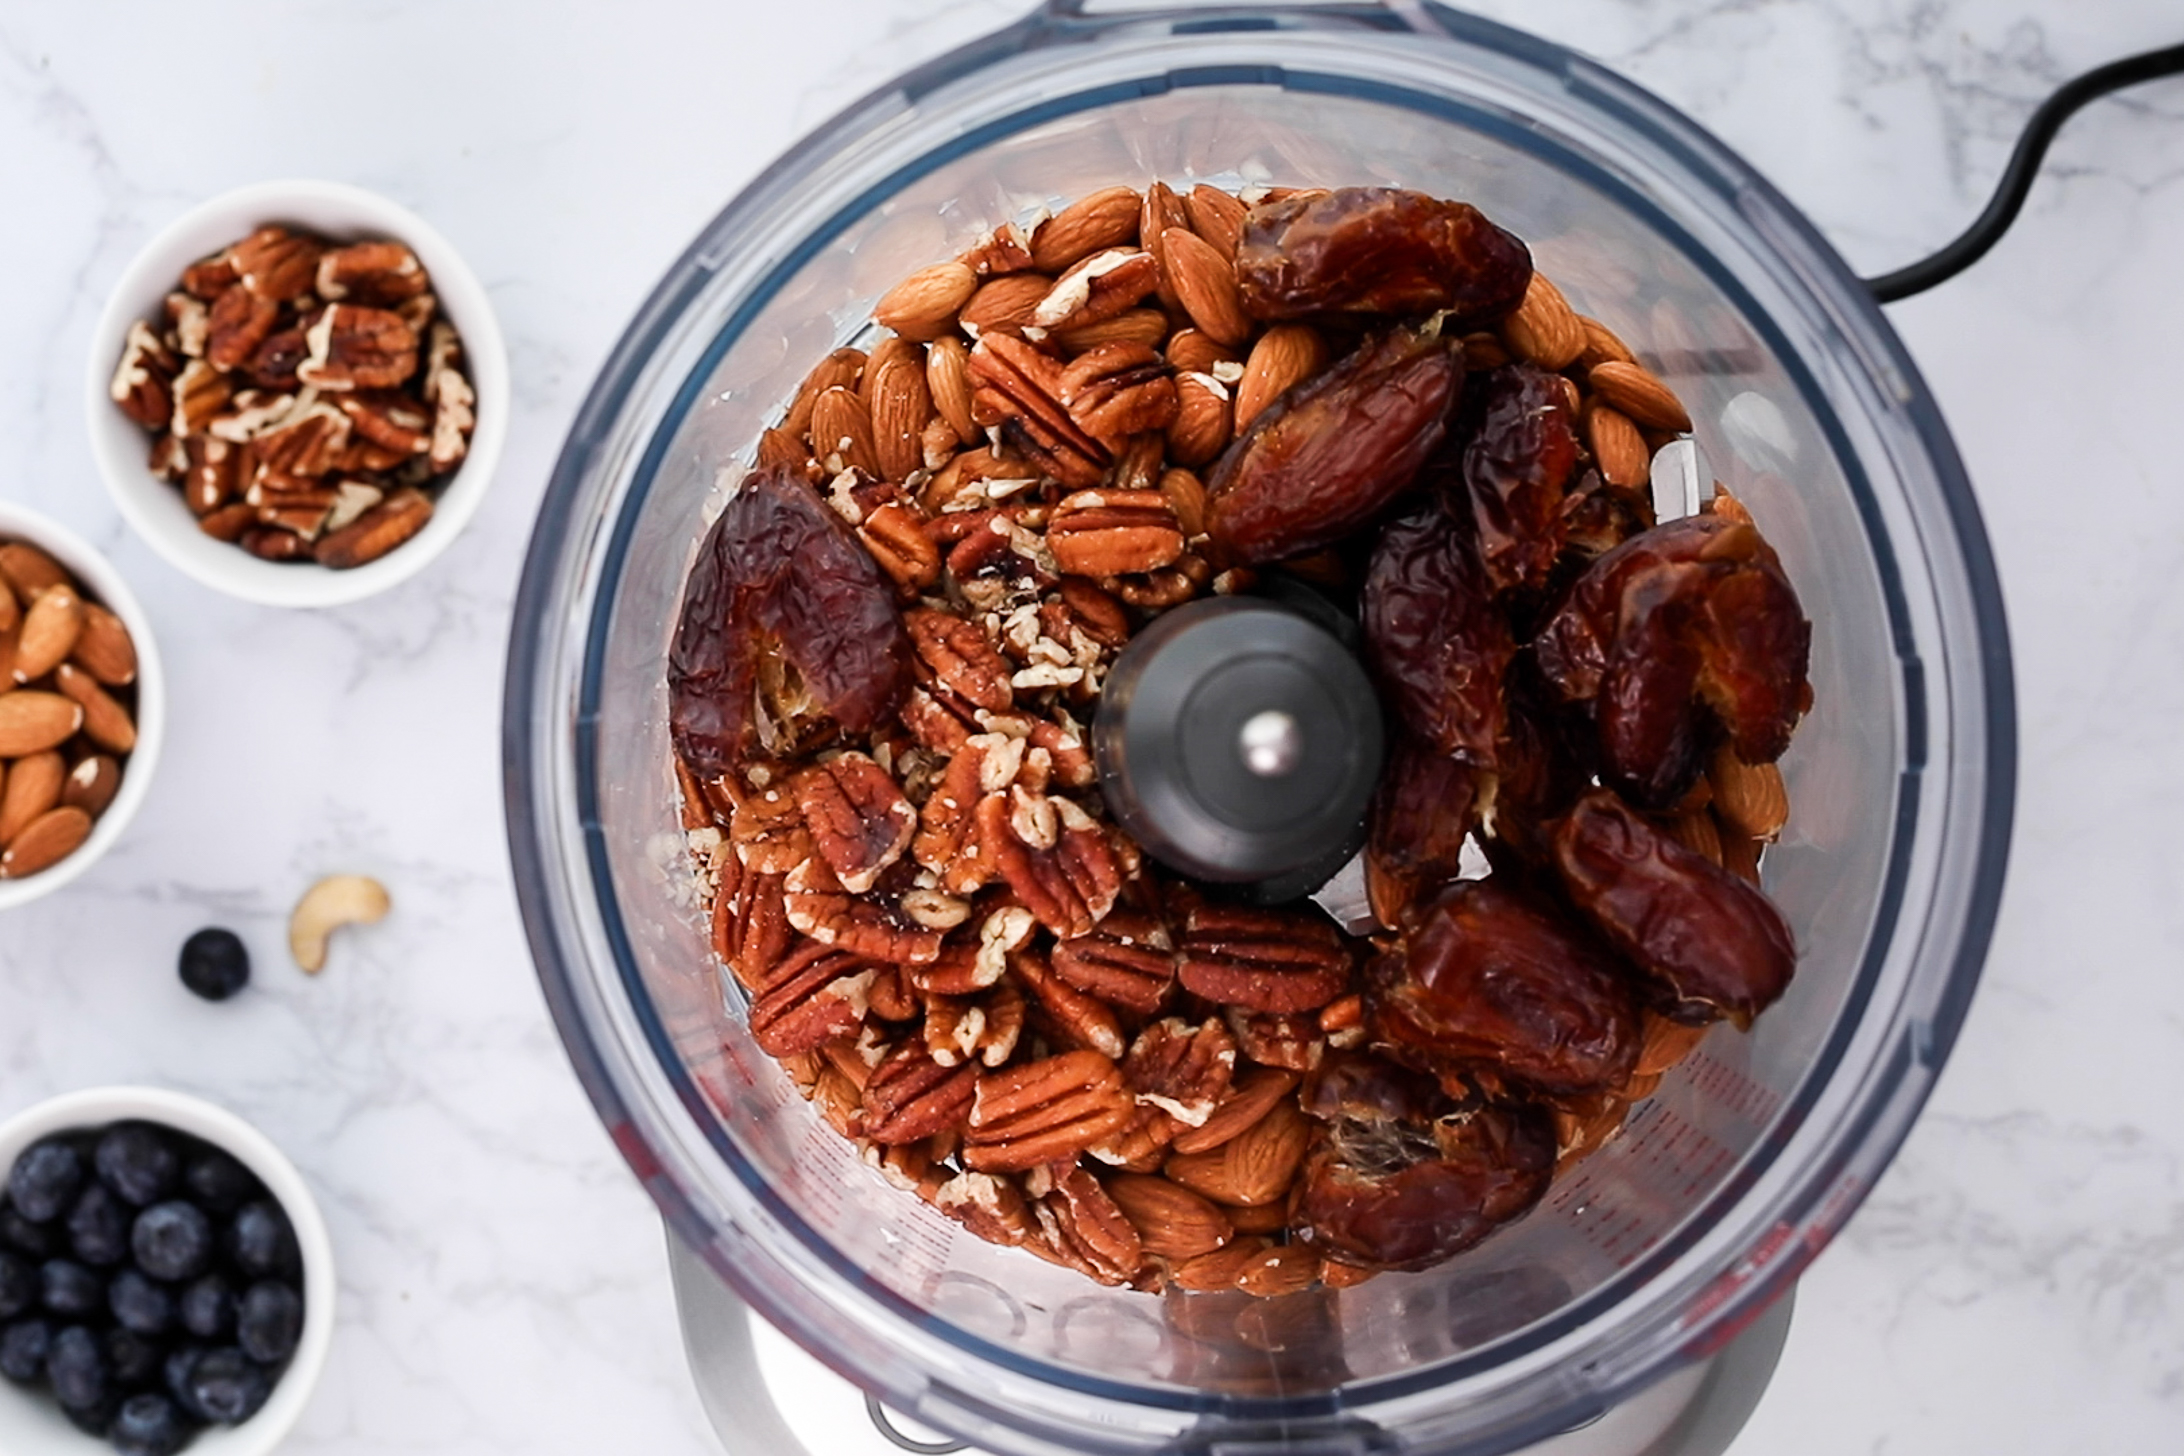 Top view of a food processor filled with dates, pecans and almonds.